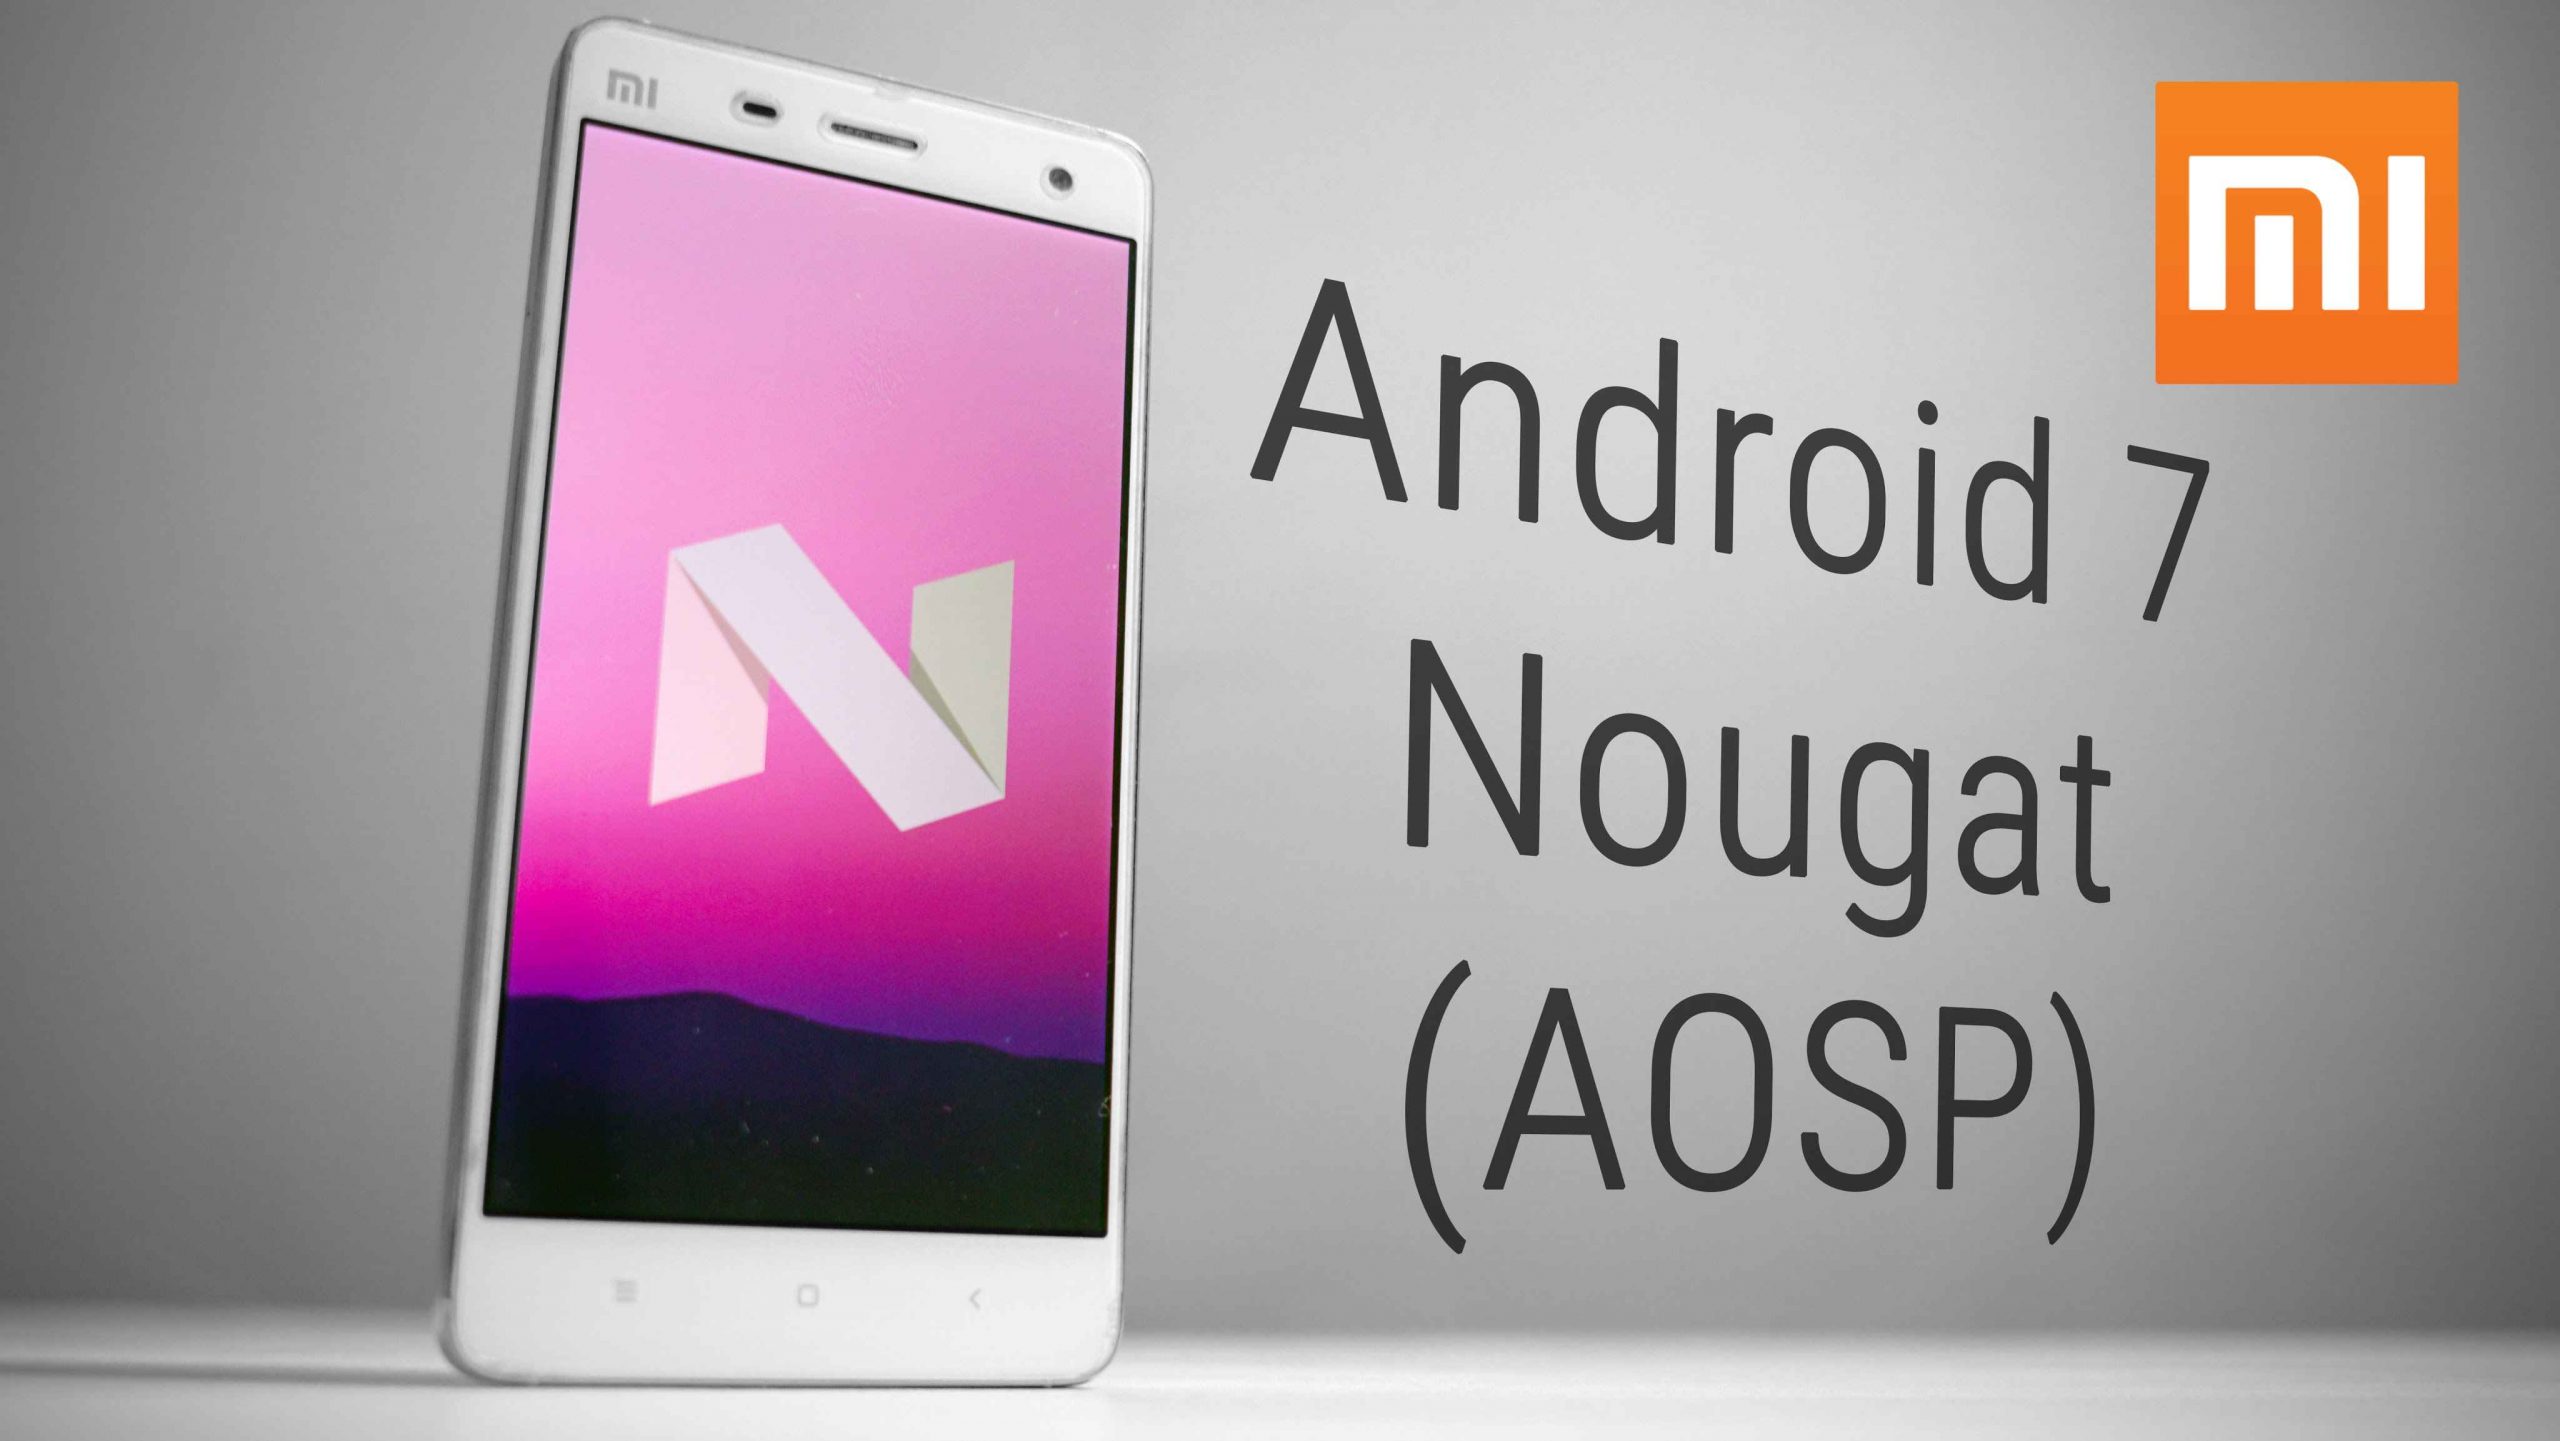 xiaomi android nougat 7.0 update